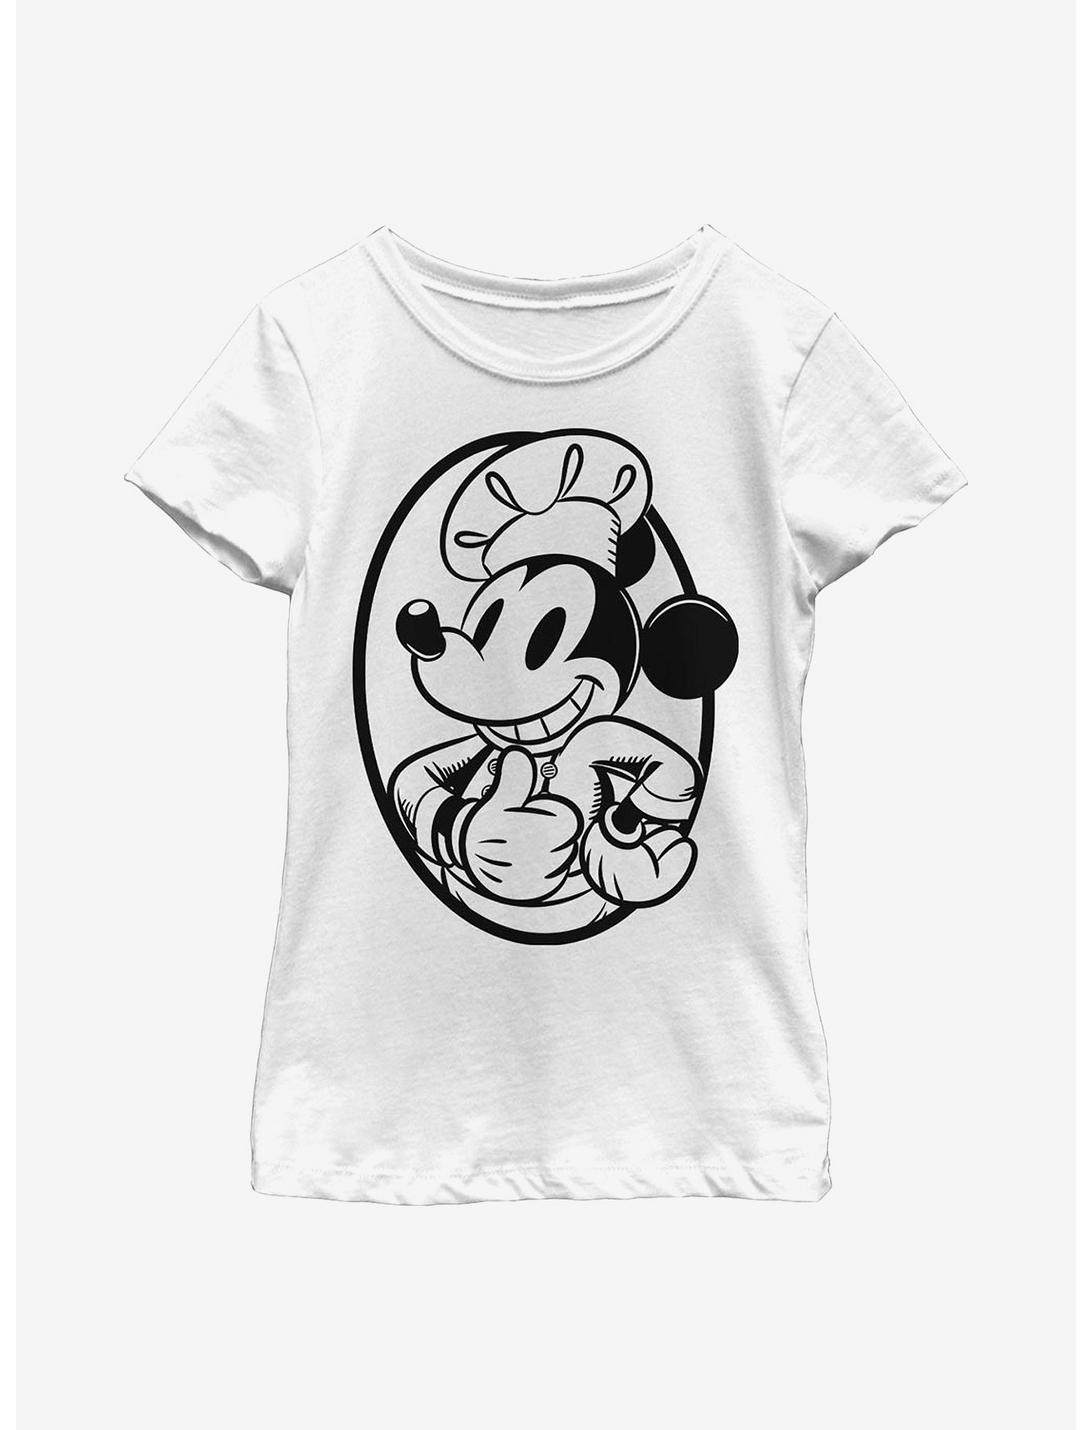 Disney Mickey Mouse Chef Mickey Circle Youth Girls T-Shirt, WHITE, hi-res